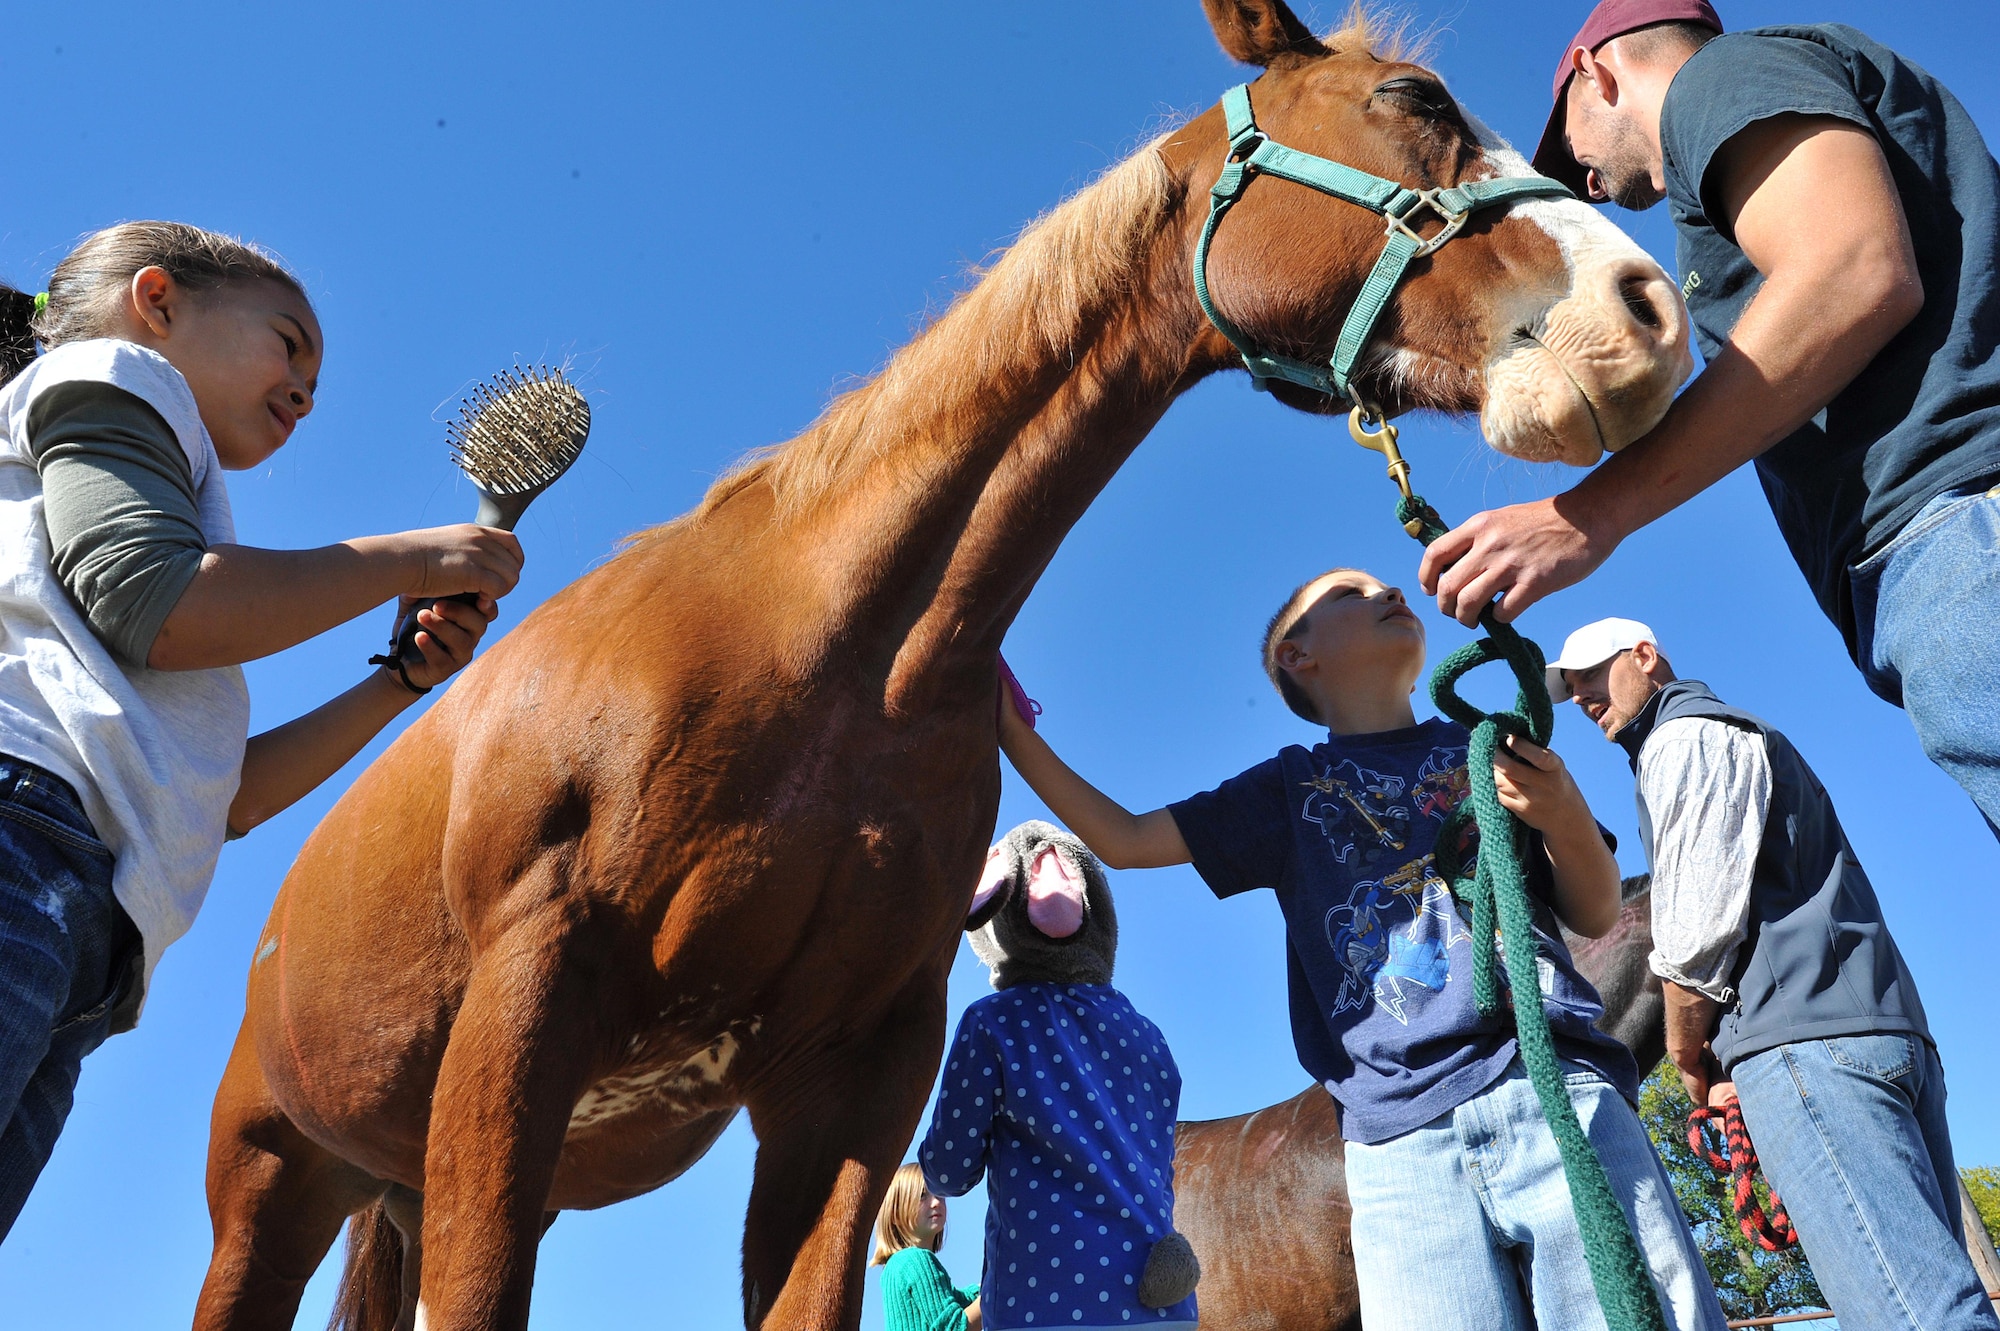 Children groom horses during an Equine Camp on Grand Forks Air Force Base, N.D. Sept. 17, 2016. The Grand Forks AFB Exceptional Family Member Program sponsored the camp which supported development in self-esteem, self-confidence and team building by encouraging children to interact with horses through different activities. (U.S. Air Force photo by Airman 1st Class Elijaih Tiggs)